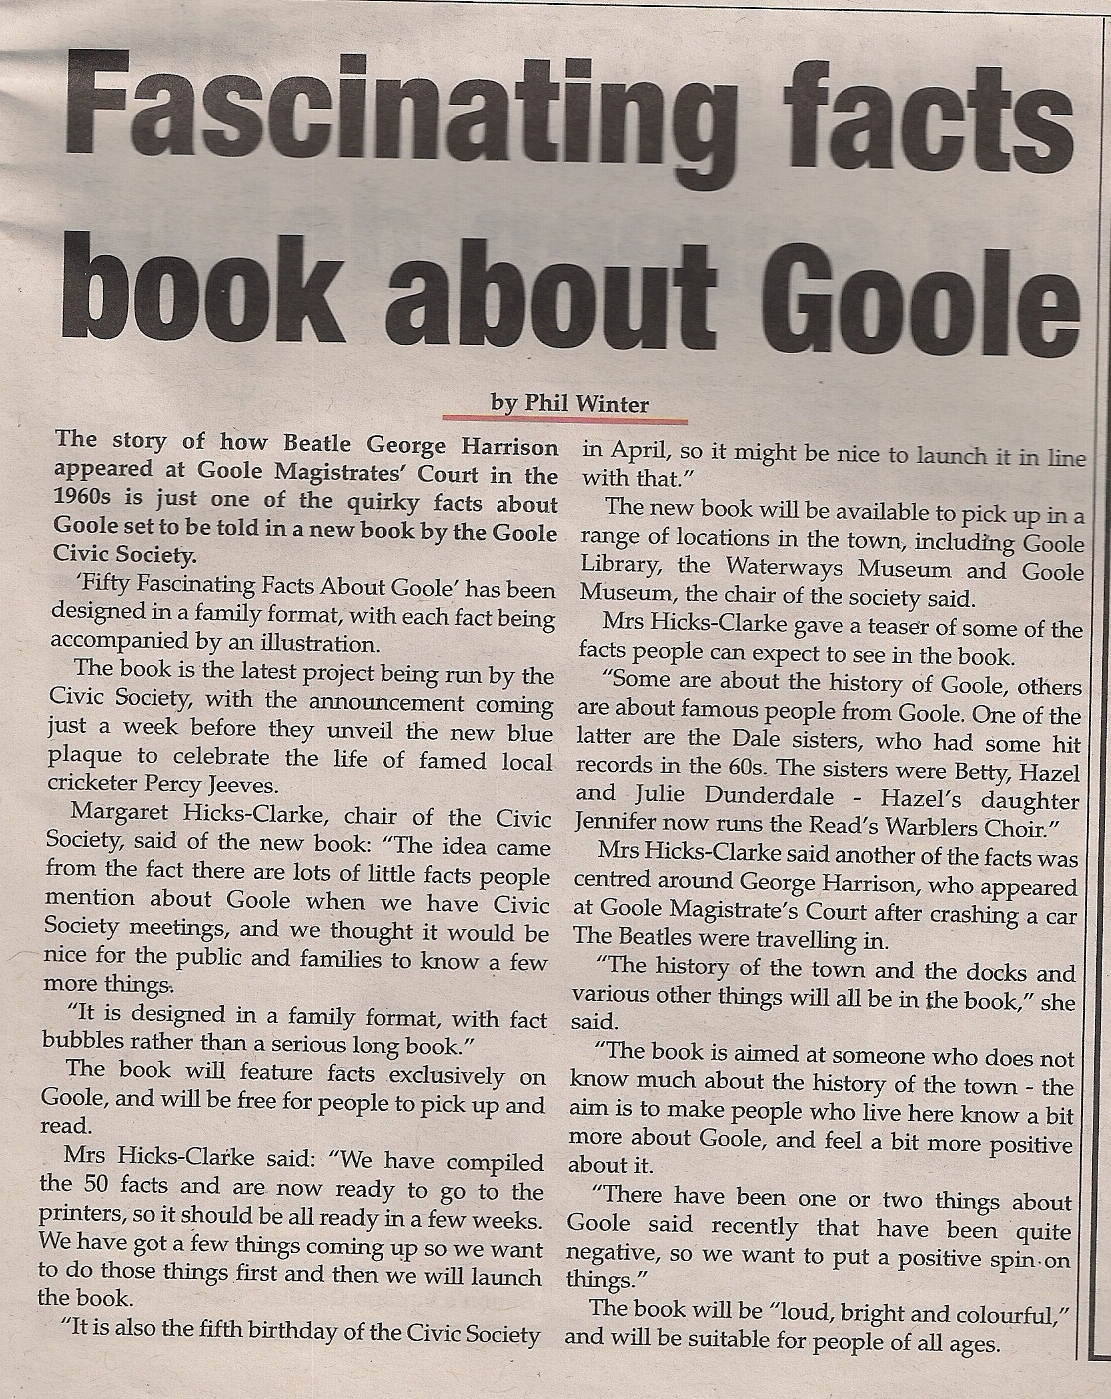 Goole Times 07 04 16 article about launch of Fascinating Facts book